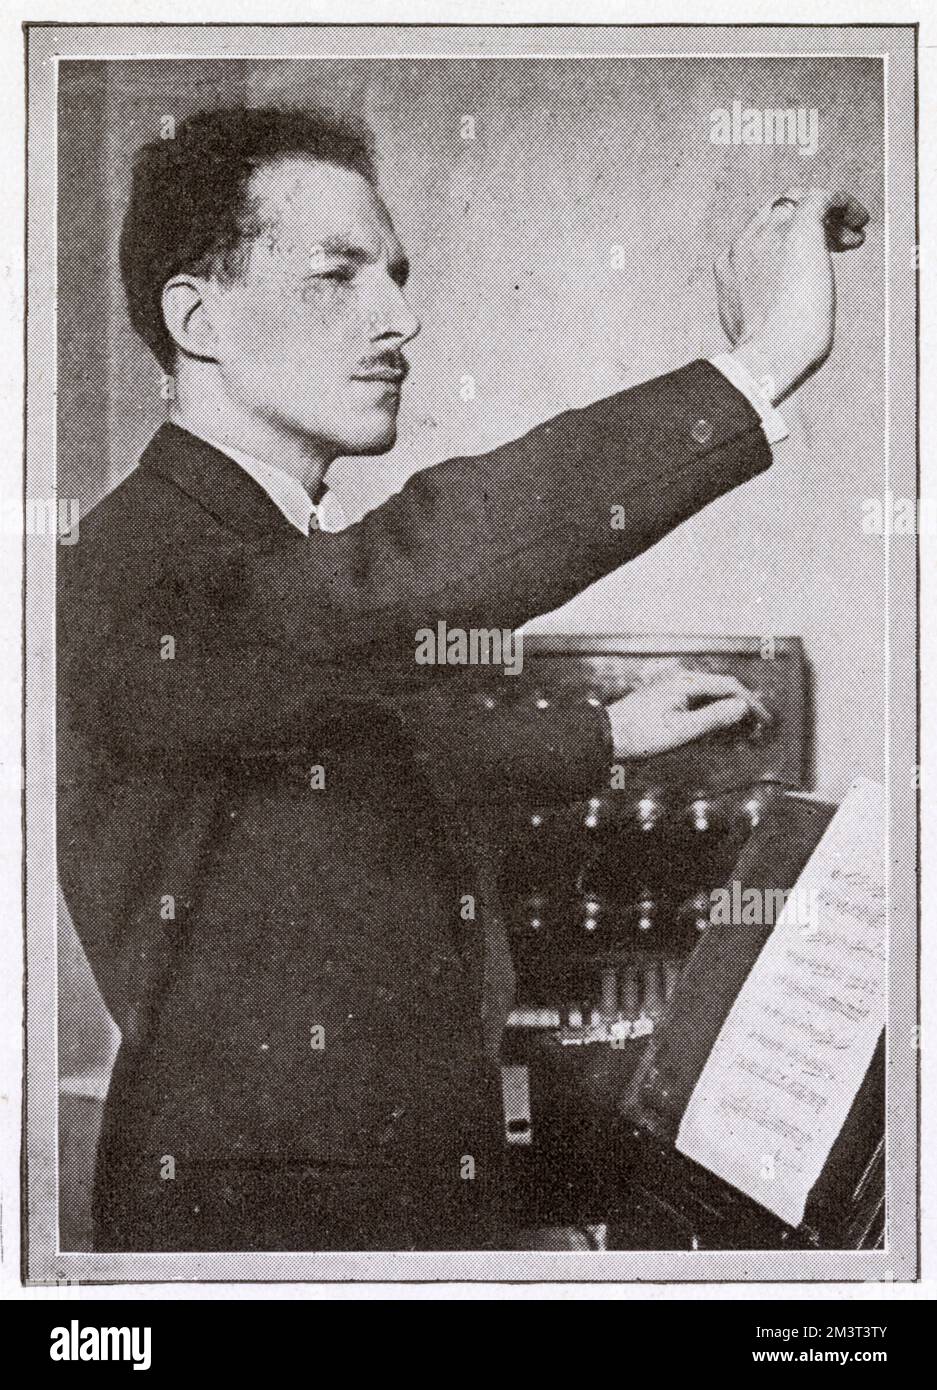 Leon Theremin (1896 - 1993) a Russian and Soviet inventor, most famous for his invention of the theremin, one of the first electronic musical instruments and the first to be mass-produced. Stock Photo